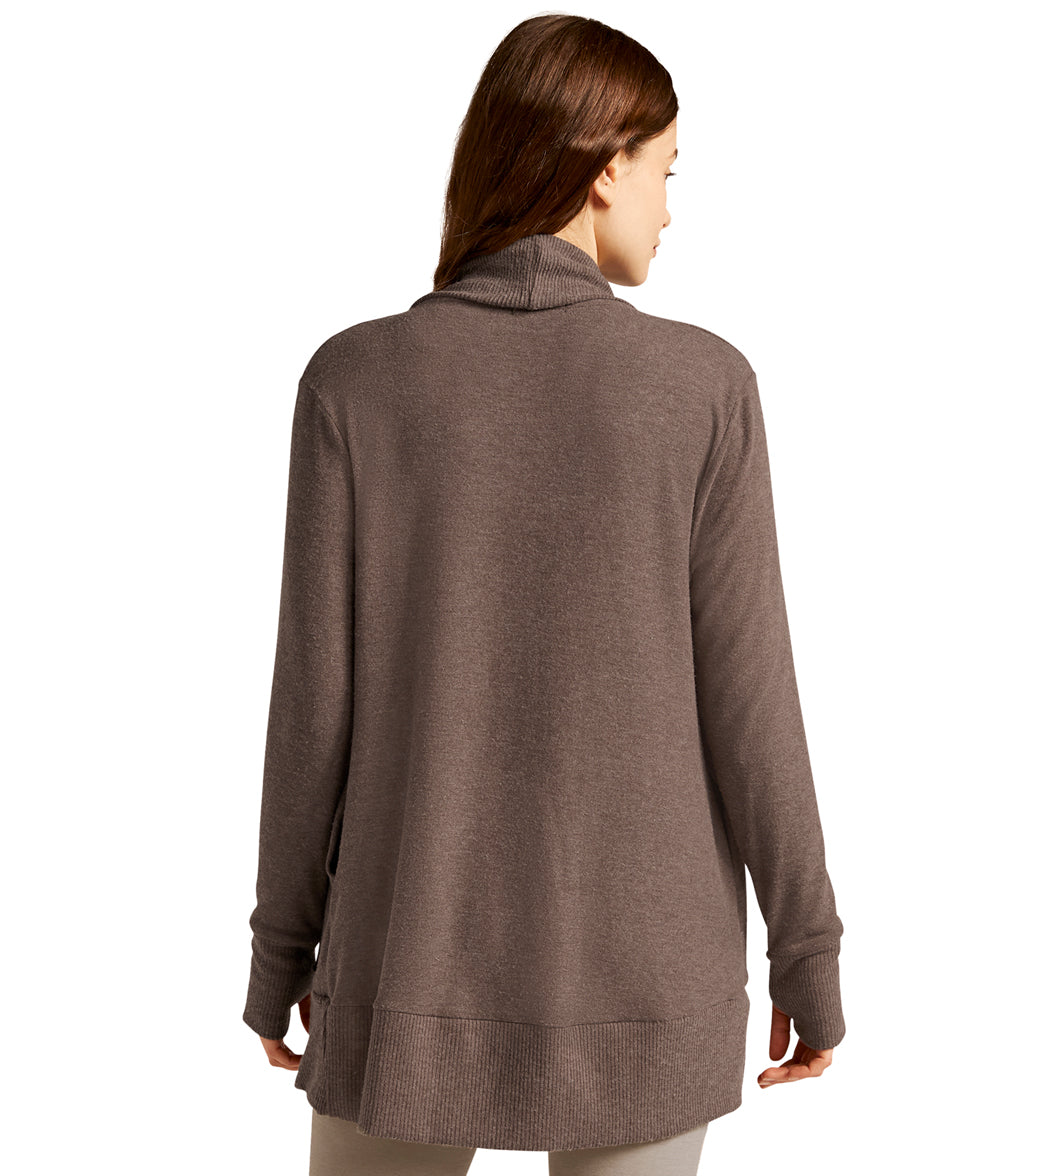 BEYOND YOGA RIBBED CONVERTIBLE CARDIGAN IN OATMEAL HEATHER